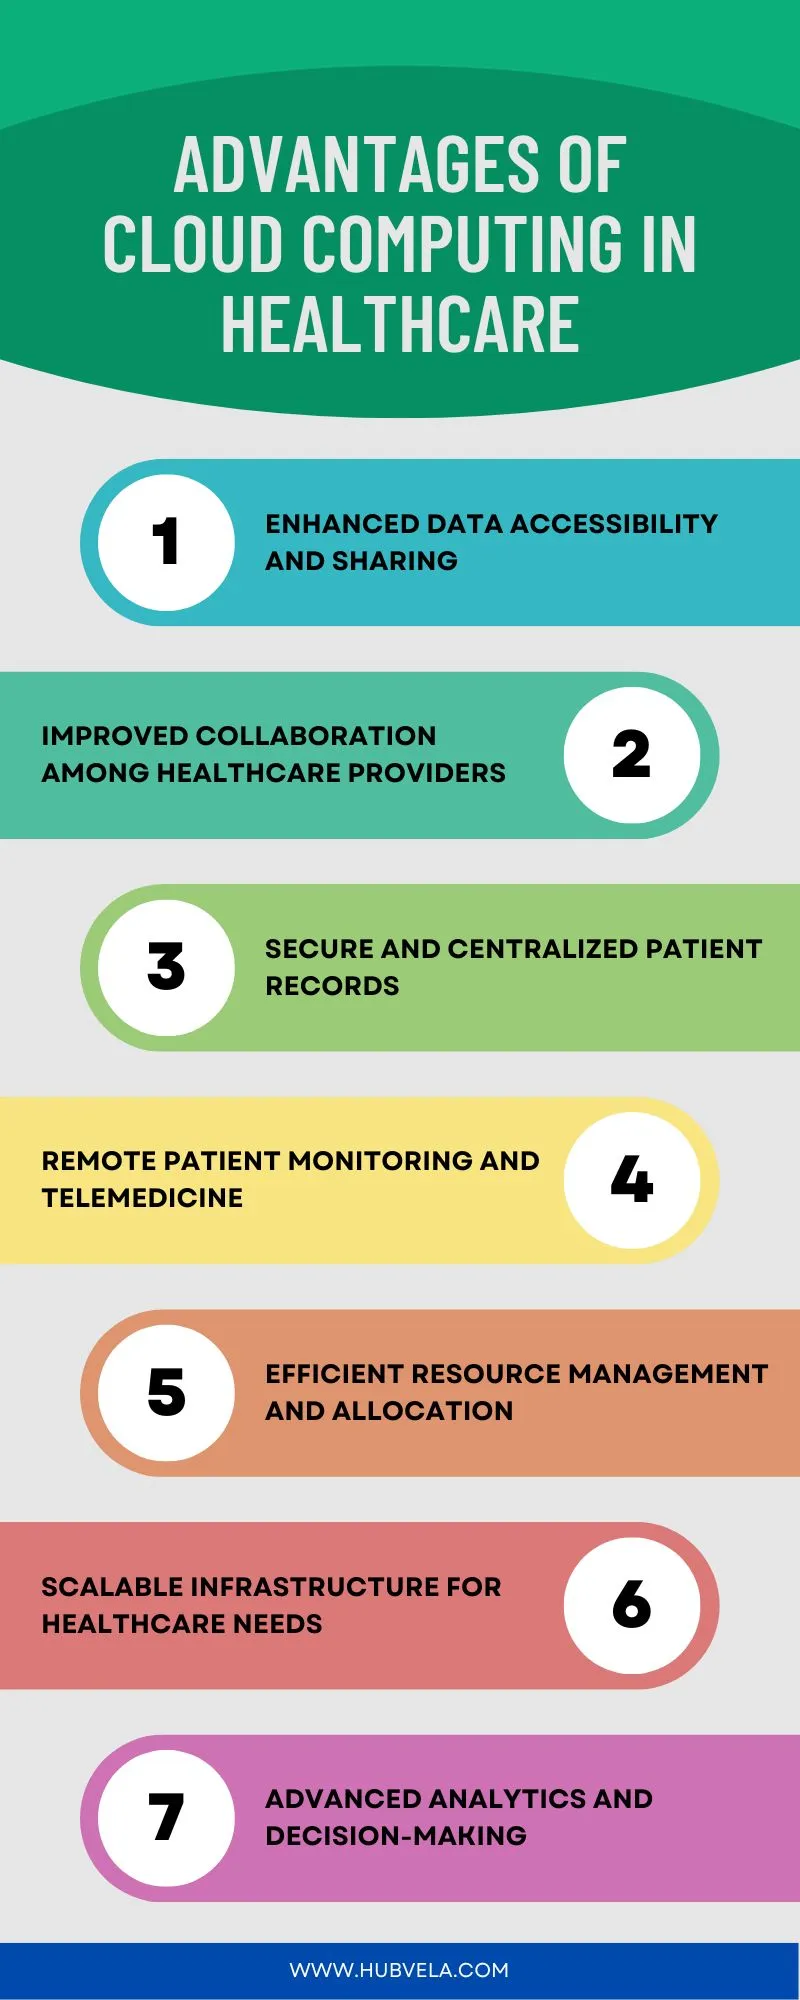 Advantages of Cloud Computing in Healthcare Infographic